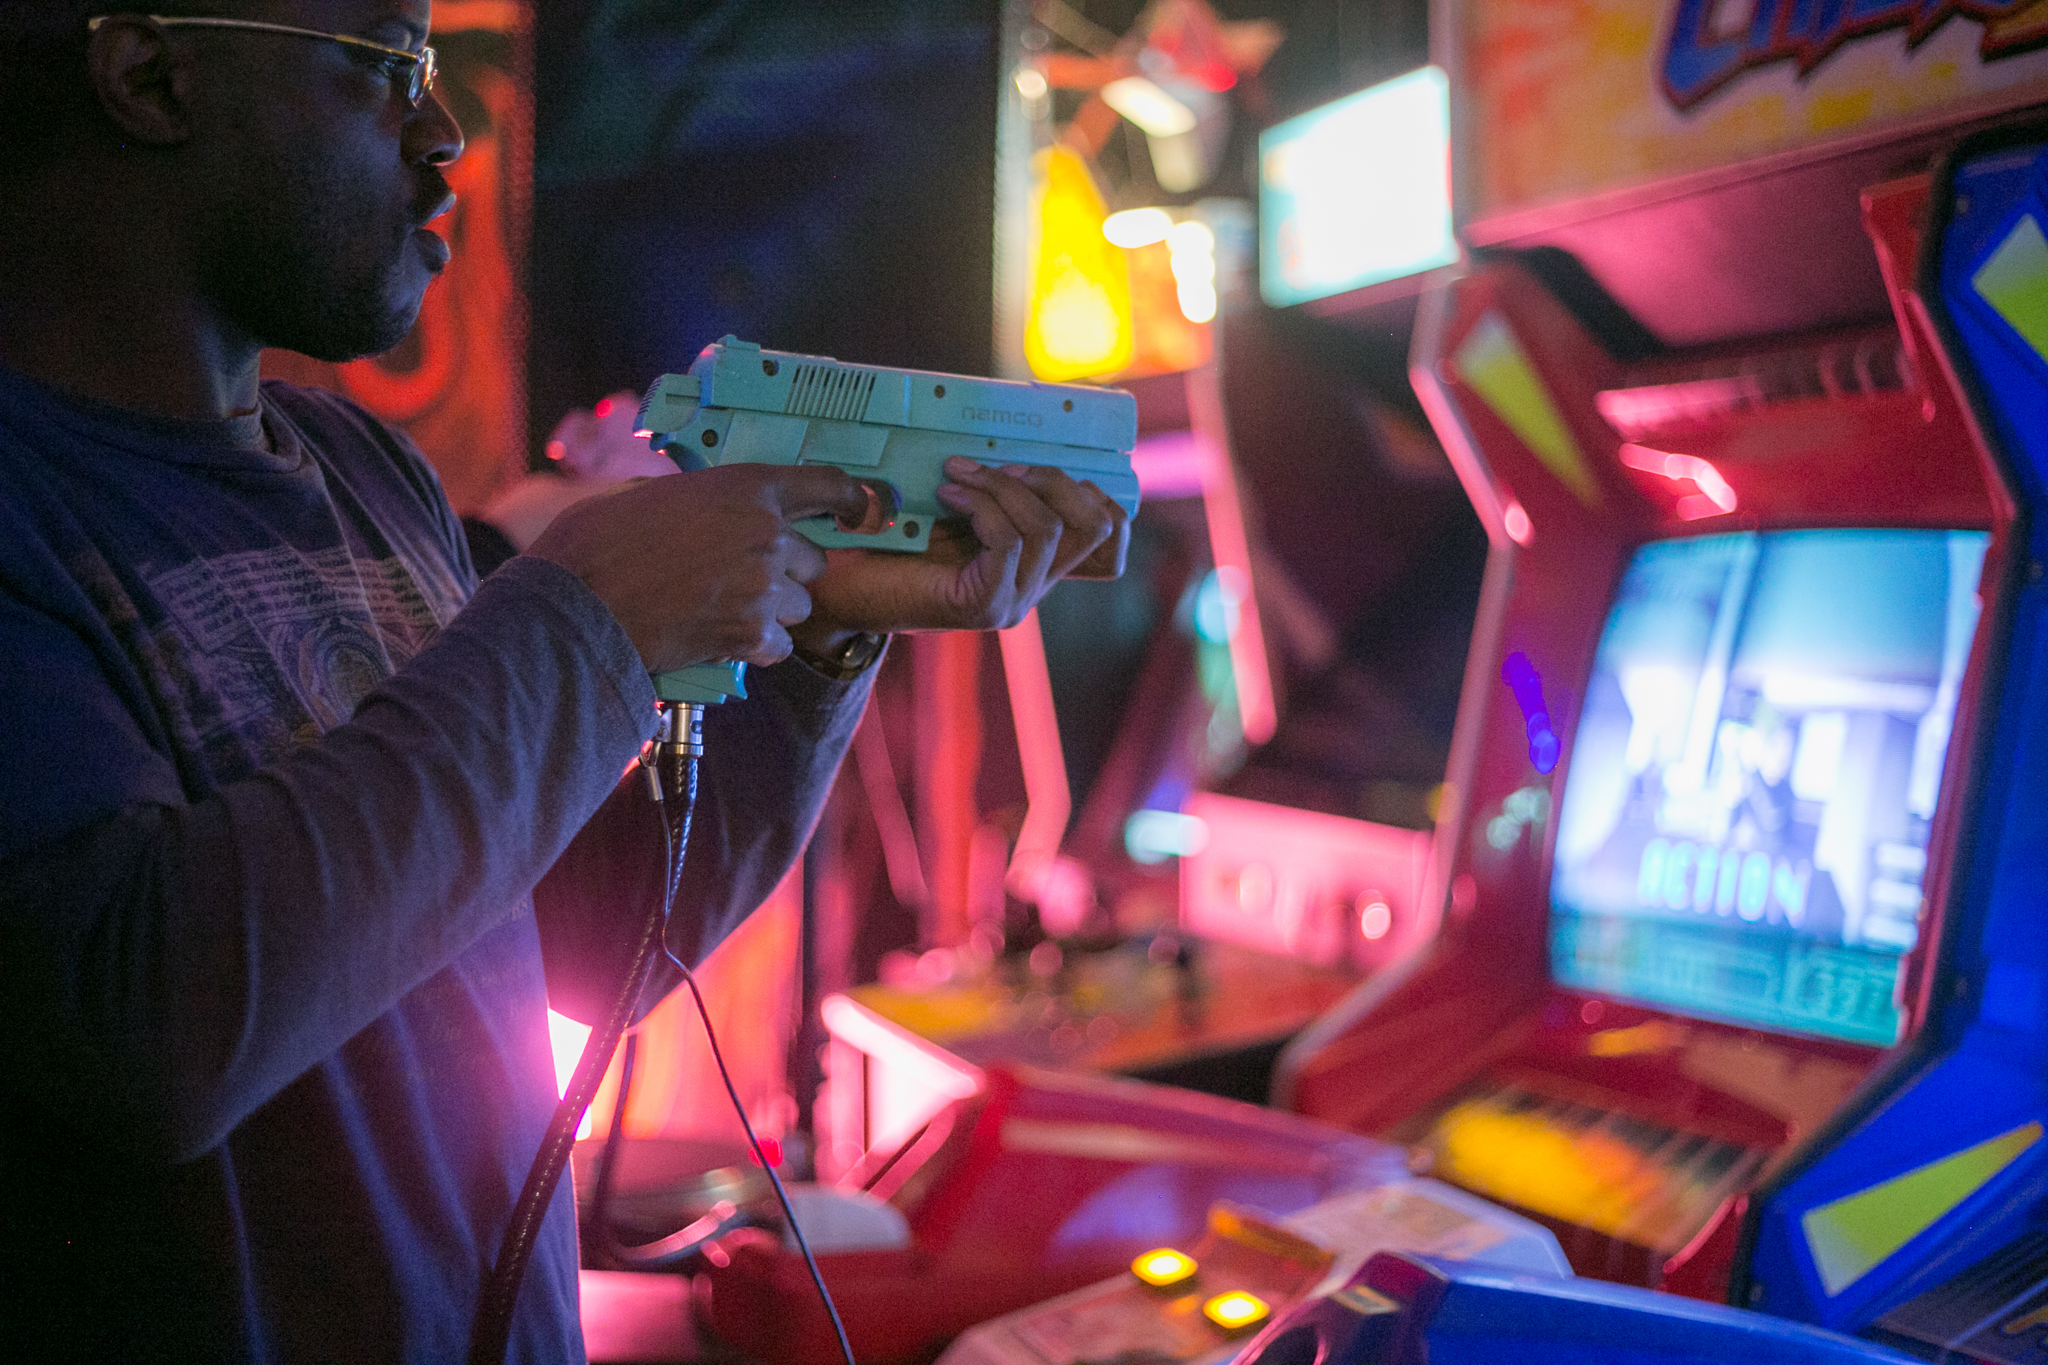 In pink-tinted arcade lighting at Four Quarters, Peckham, a man holds a plastic gun up to the screen of his game.